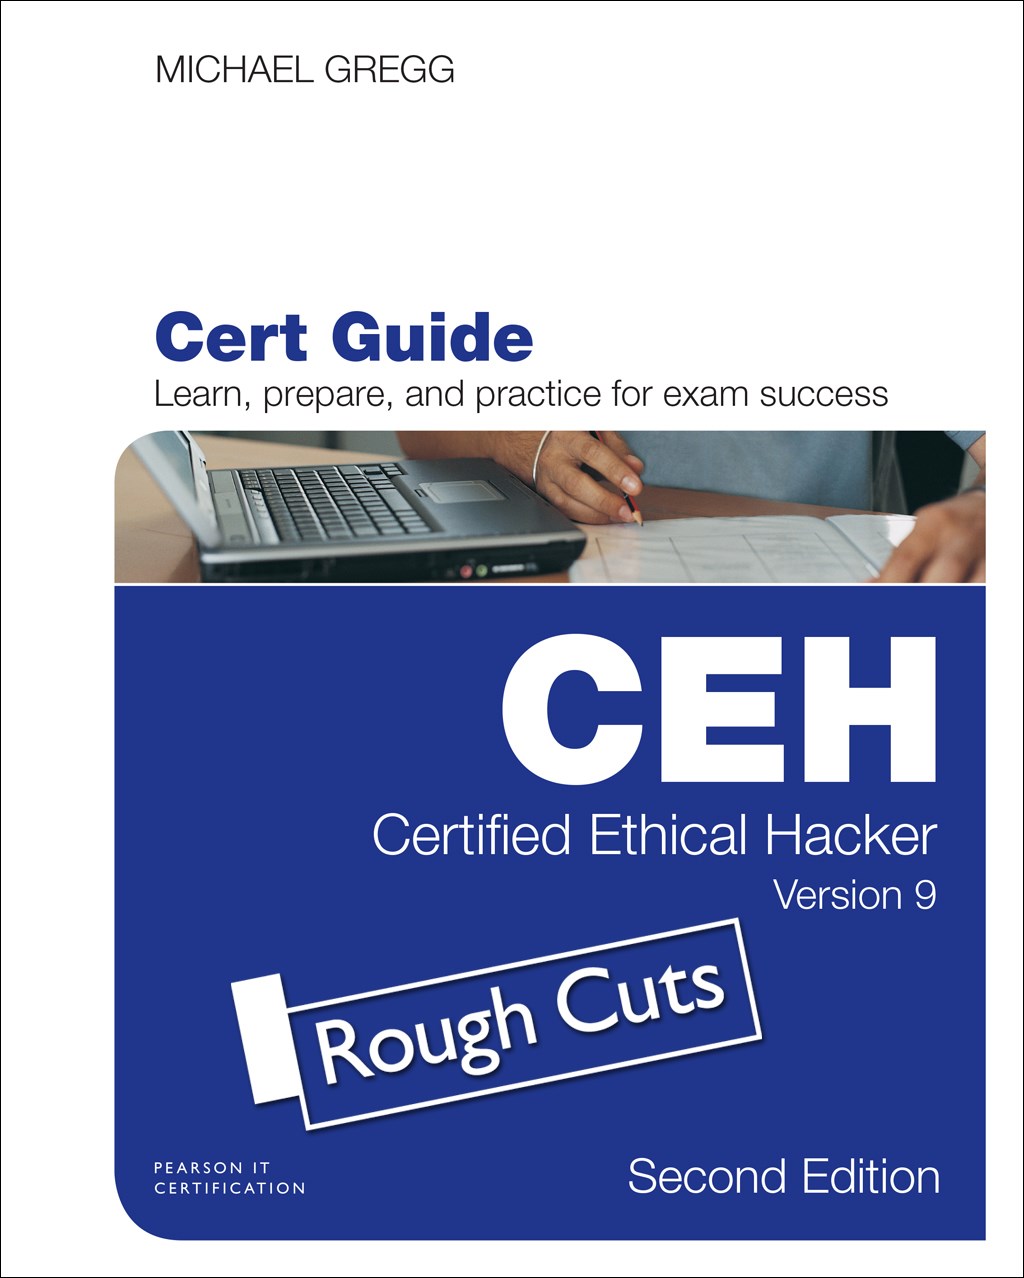 Certified Ethical Hacker (CEH) Version 9 Cert Guide,Rough Cuts, 2nd Edition